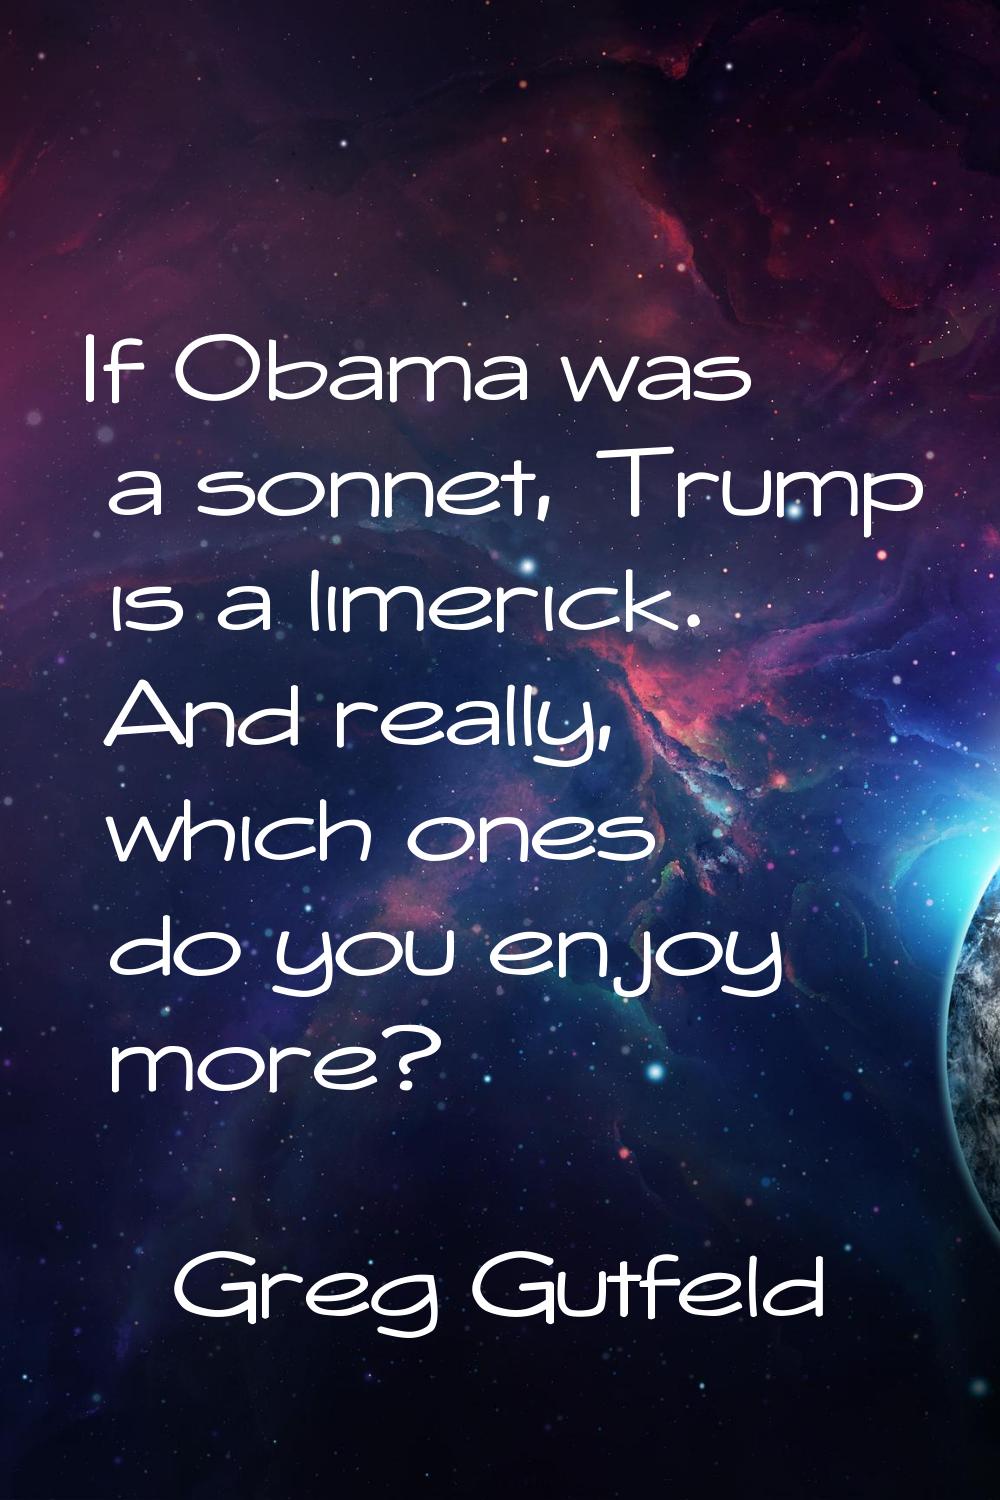 If Obama was a sonnet, Trump is a limerick. And really, which ones do you enjoy more?